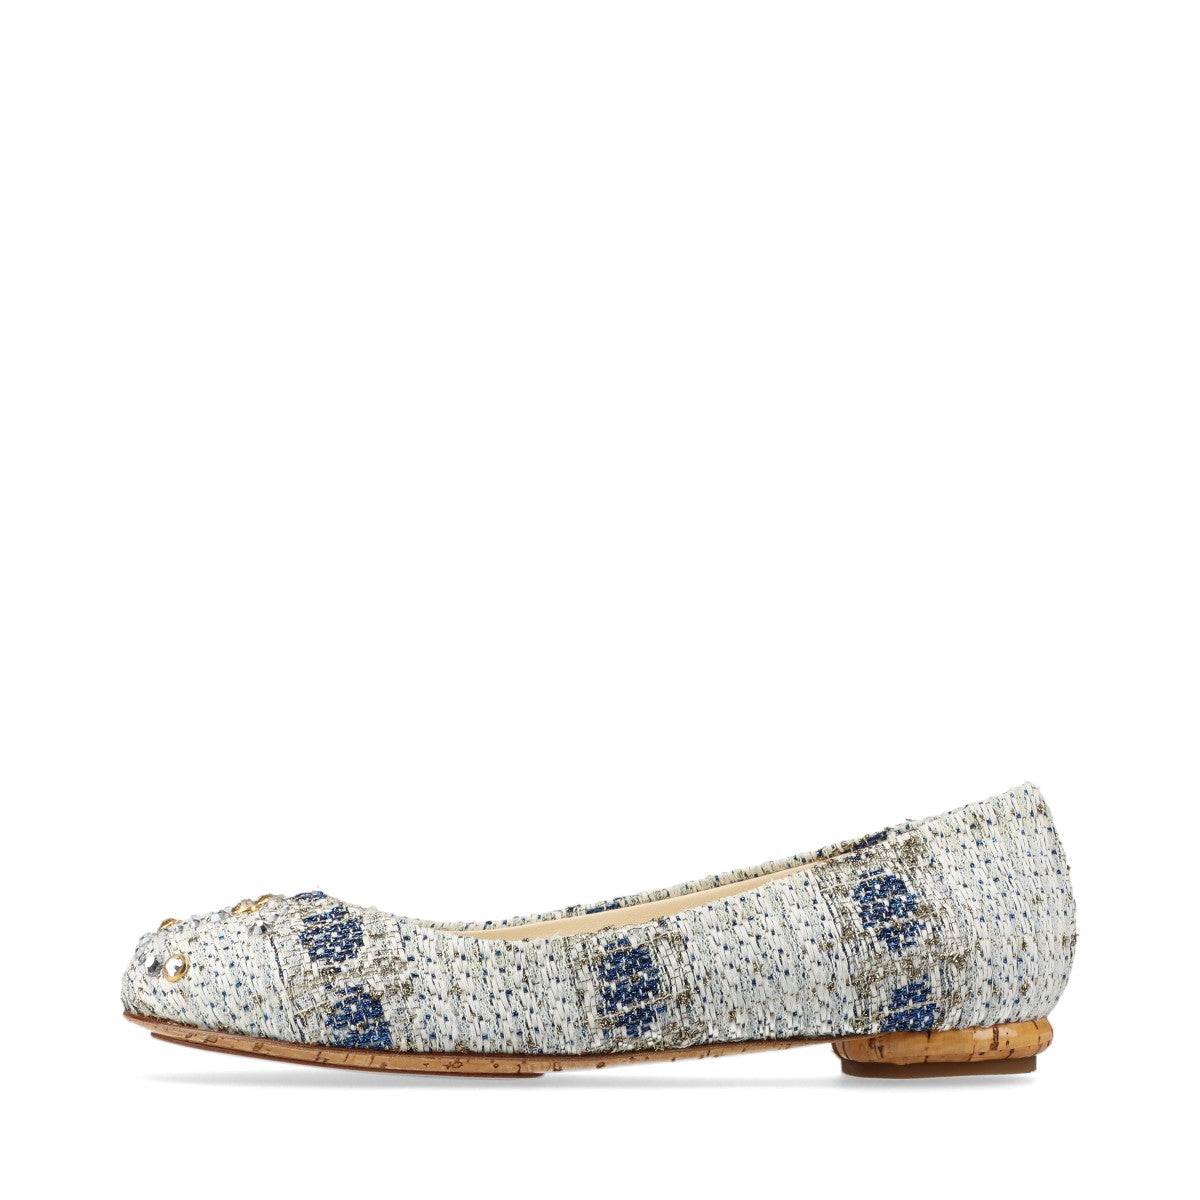 Chanel Coco Mark Leather x fabric Flat Pumps 36.5C Ladies' Blue x white G28134 Tweed Rhinestone There is a box